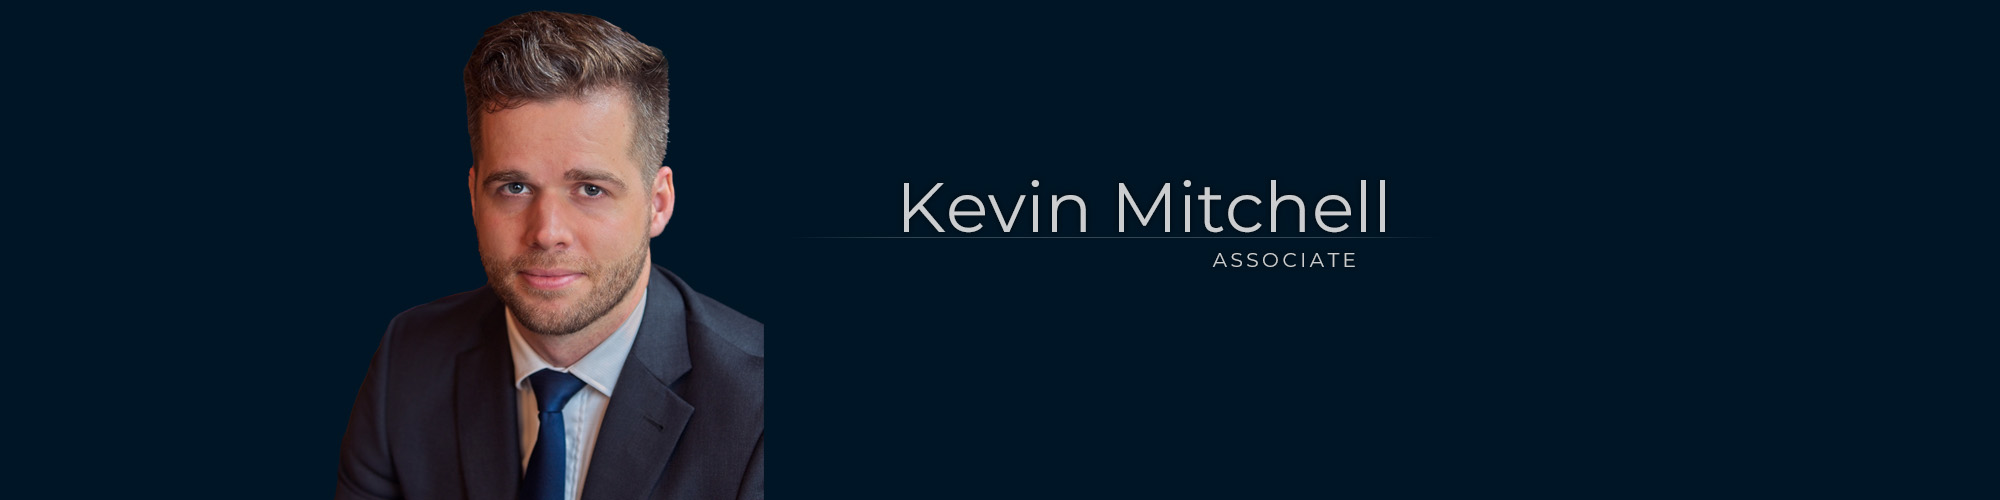 Kevin Mitchell, Associate Lawyer at Dominion GovLaw LLP